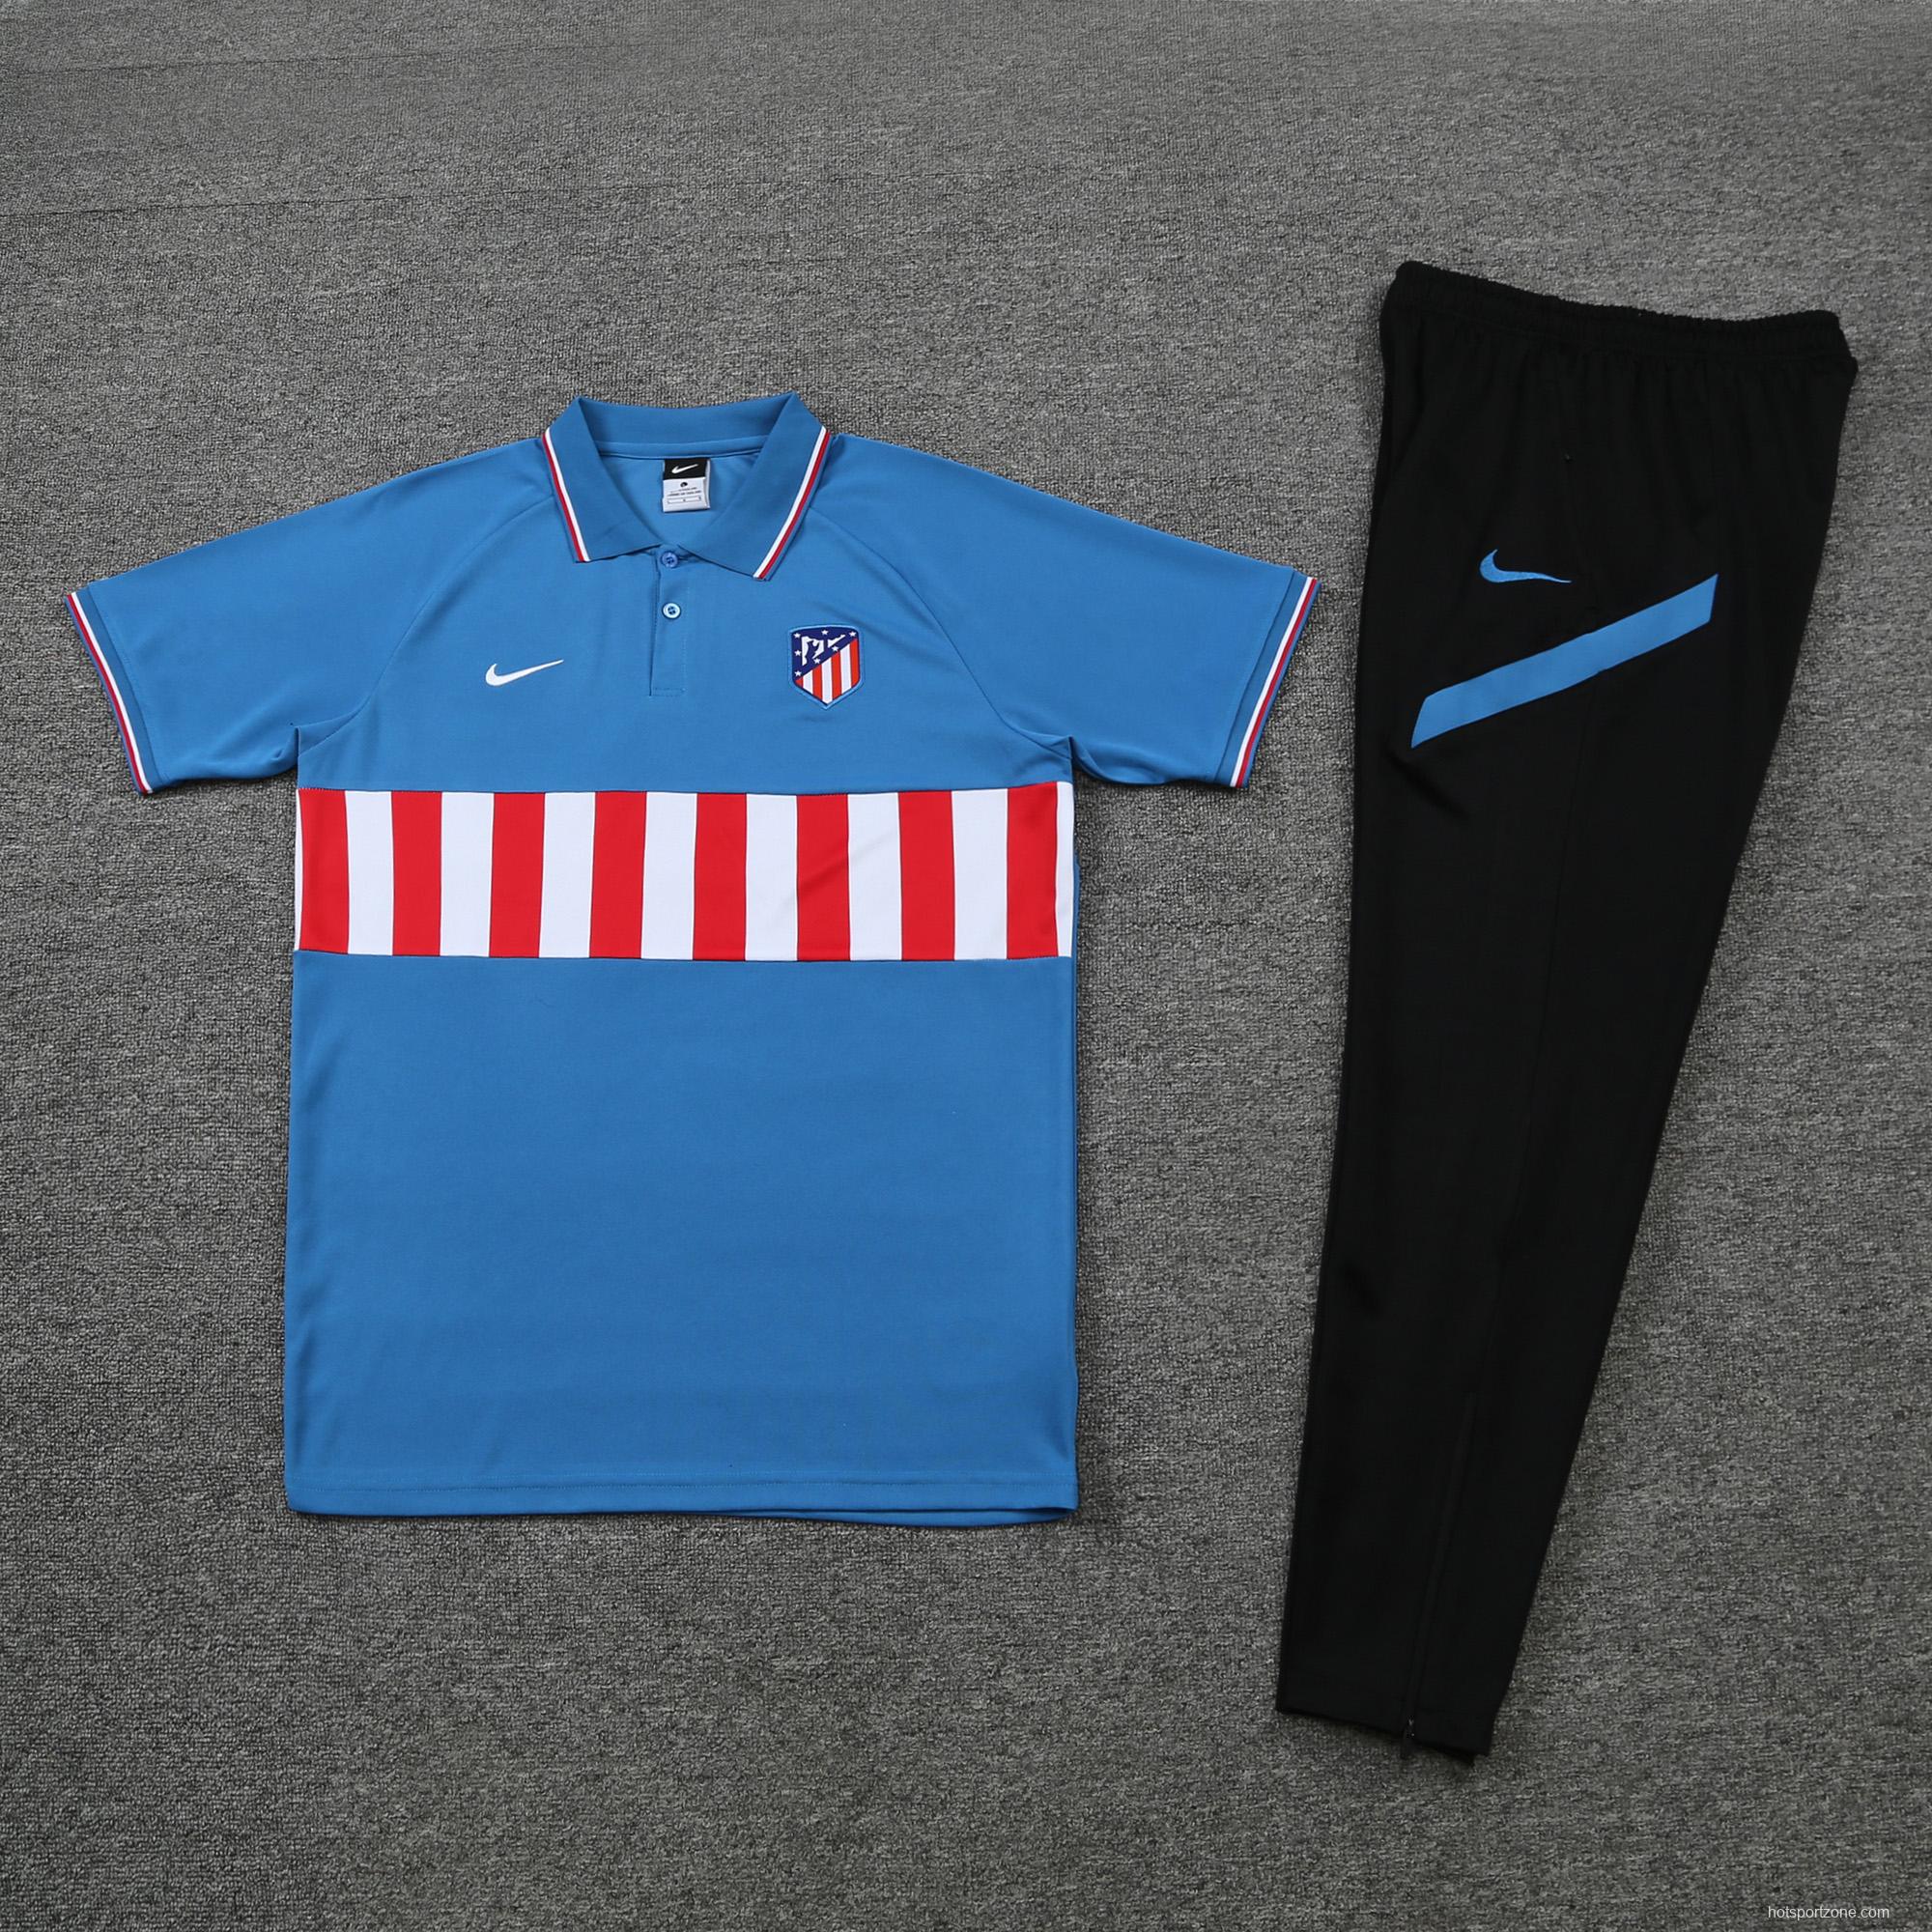 Atletico Madrid POLO kit Blue red and white stripes (not supported to be sold separately)